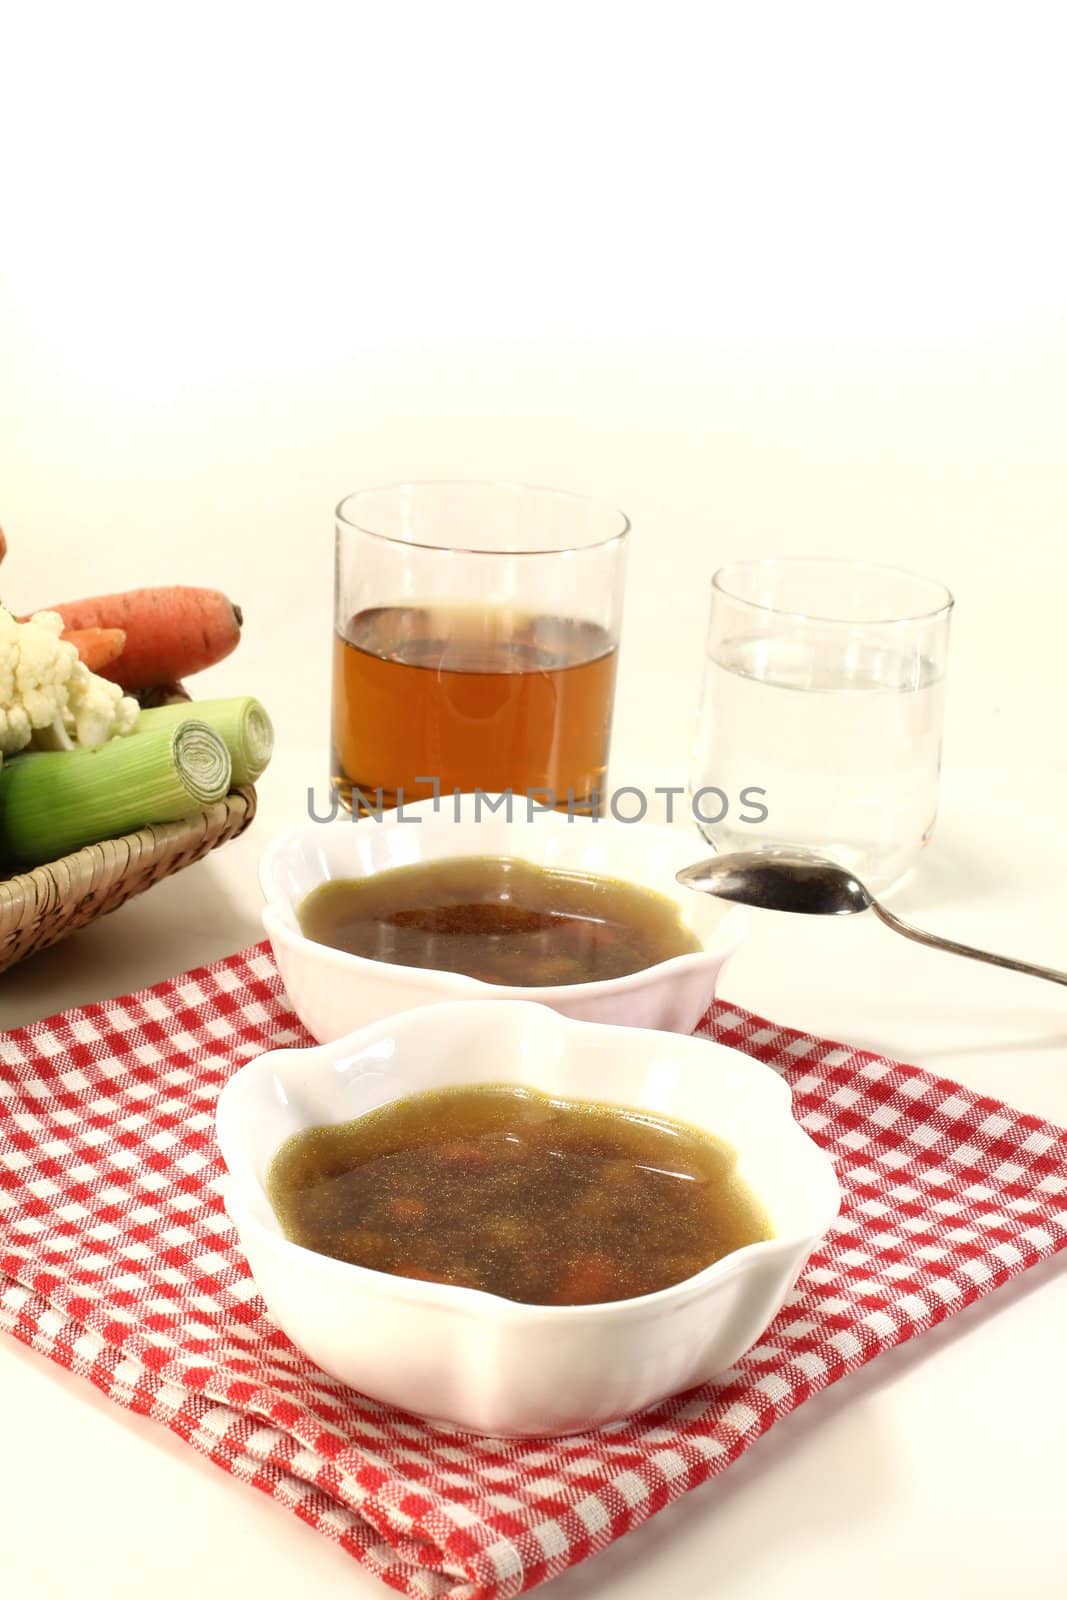 Beef consomme with vegetables on a napkin with drinks before a light background